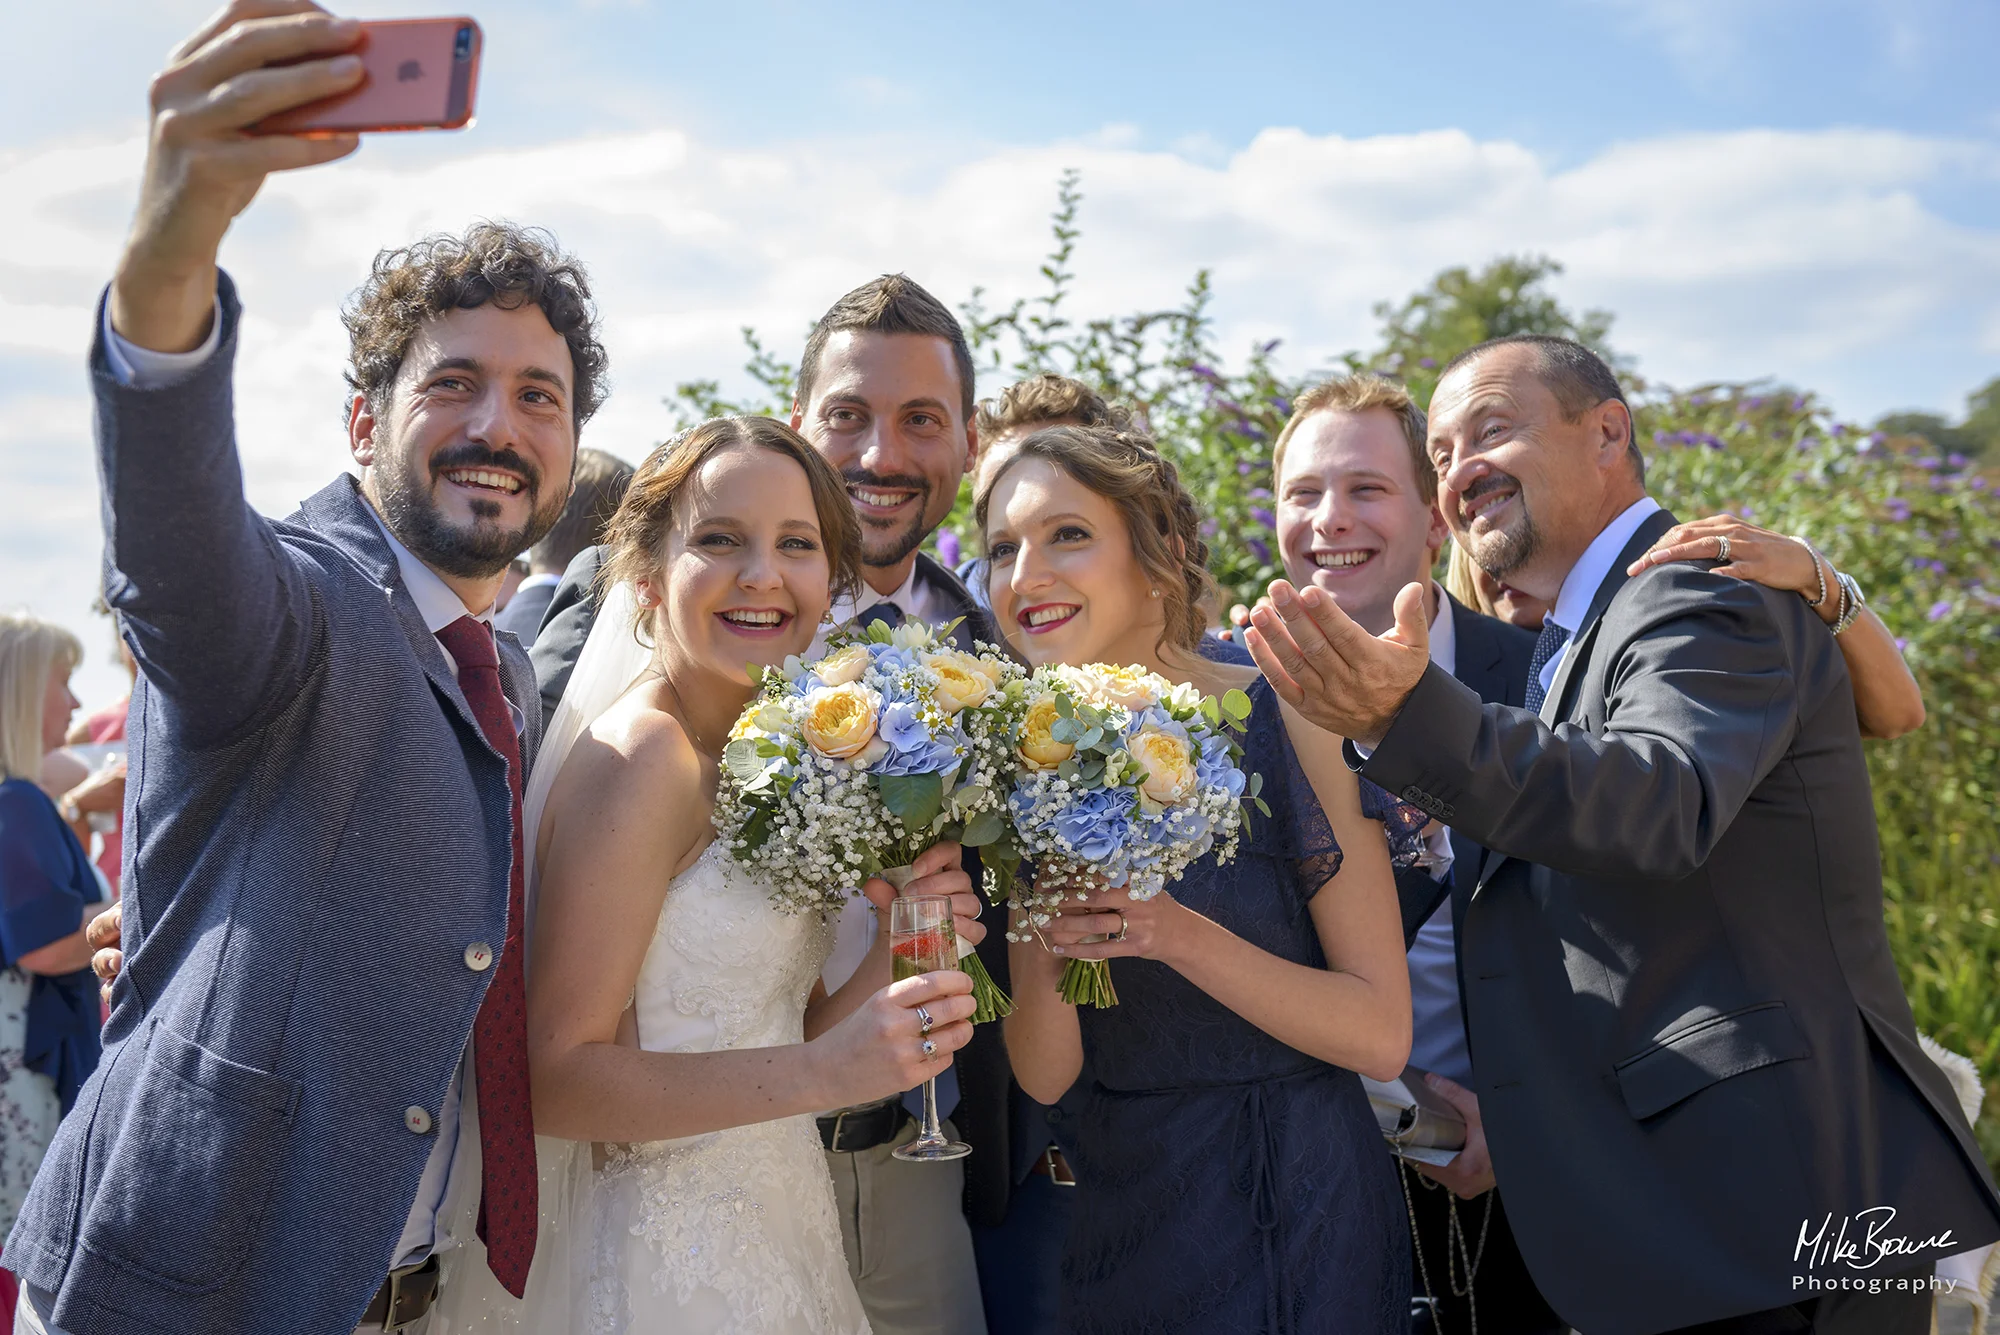 Bride and bridesmaid holding bouquets posing for a selfie with friends on a sunny day